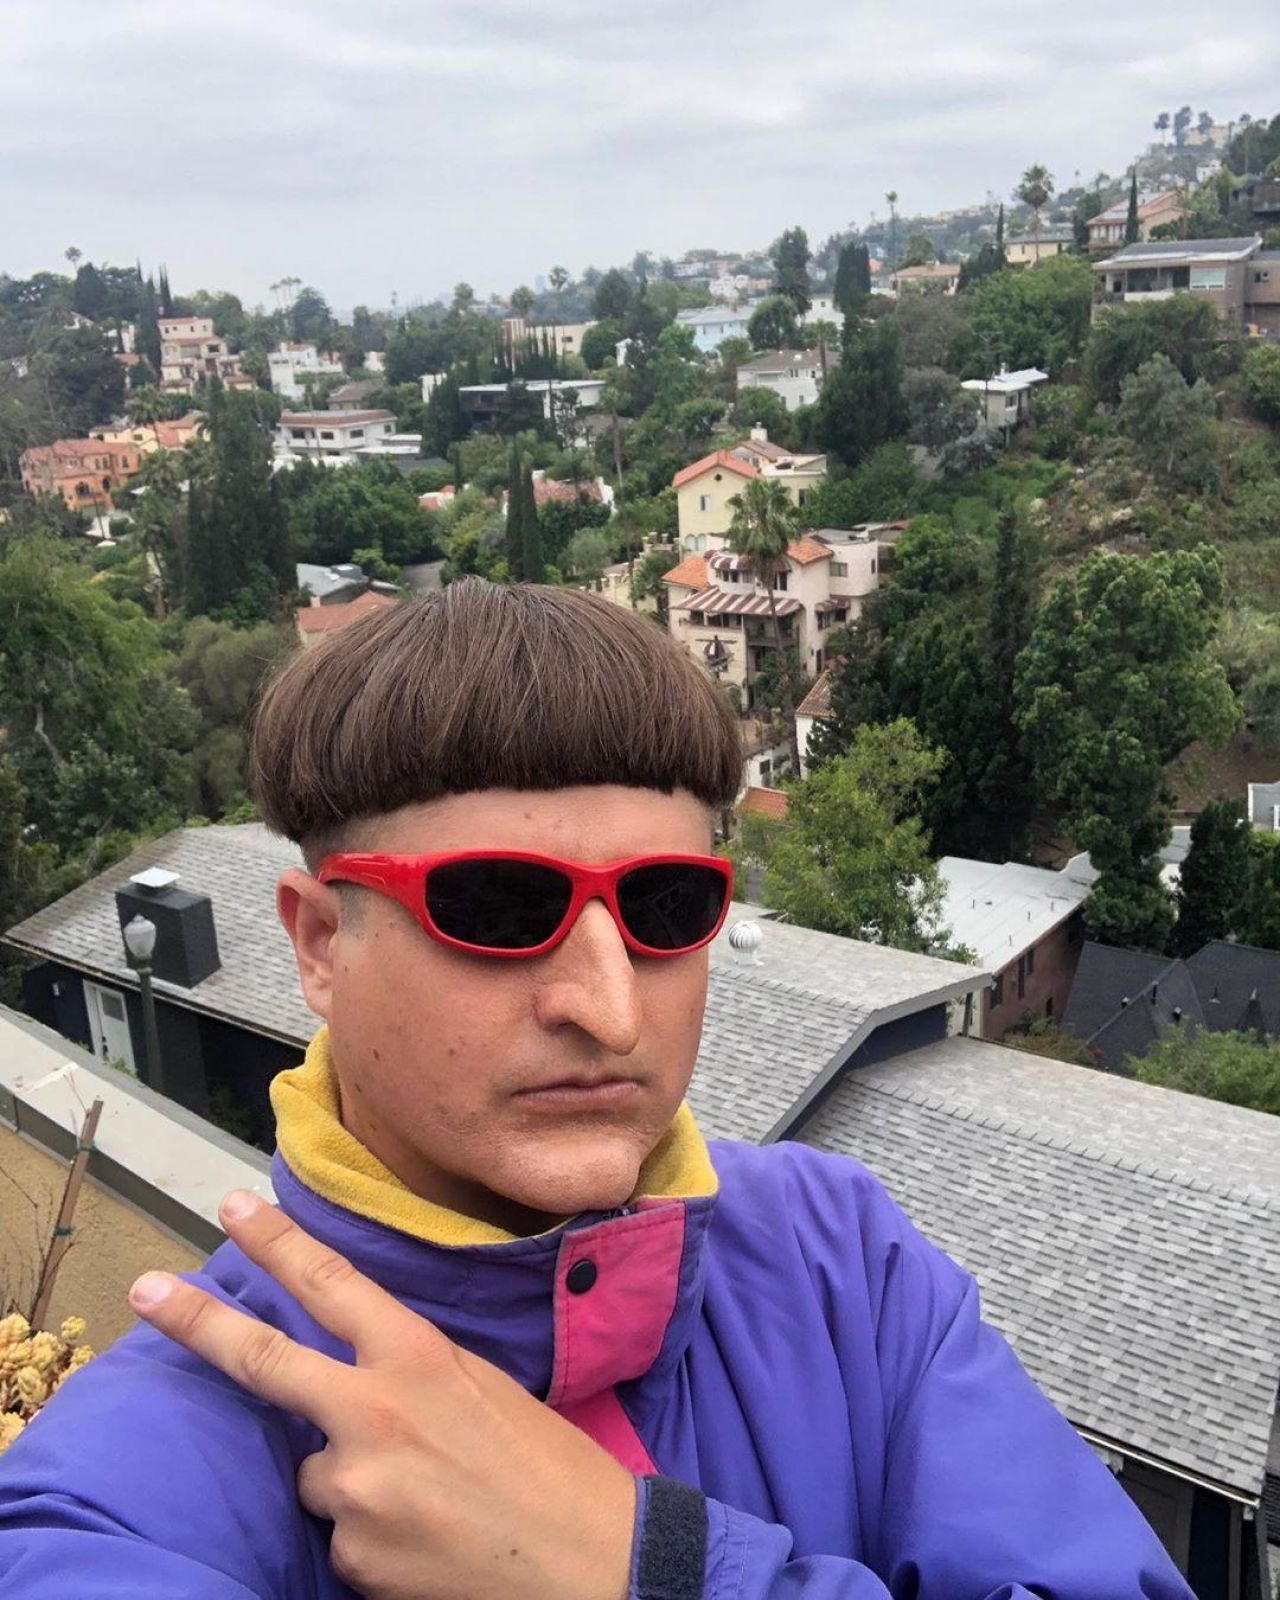 Red Sunglasses worn by Oliver Tree on the Instagram account @olivertree.